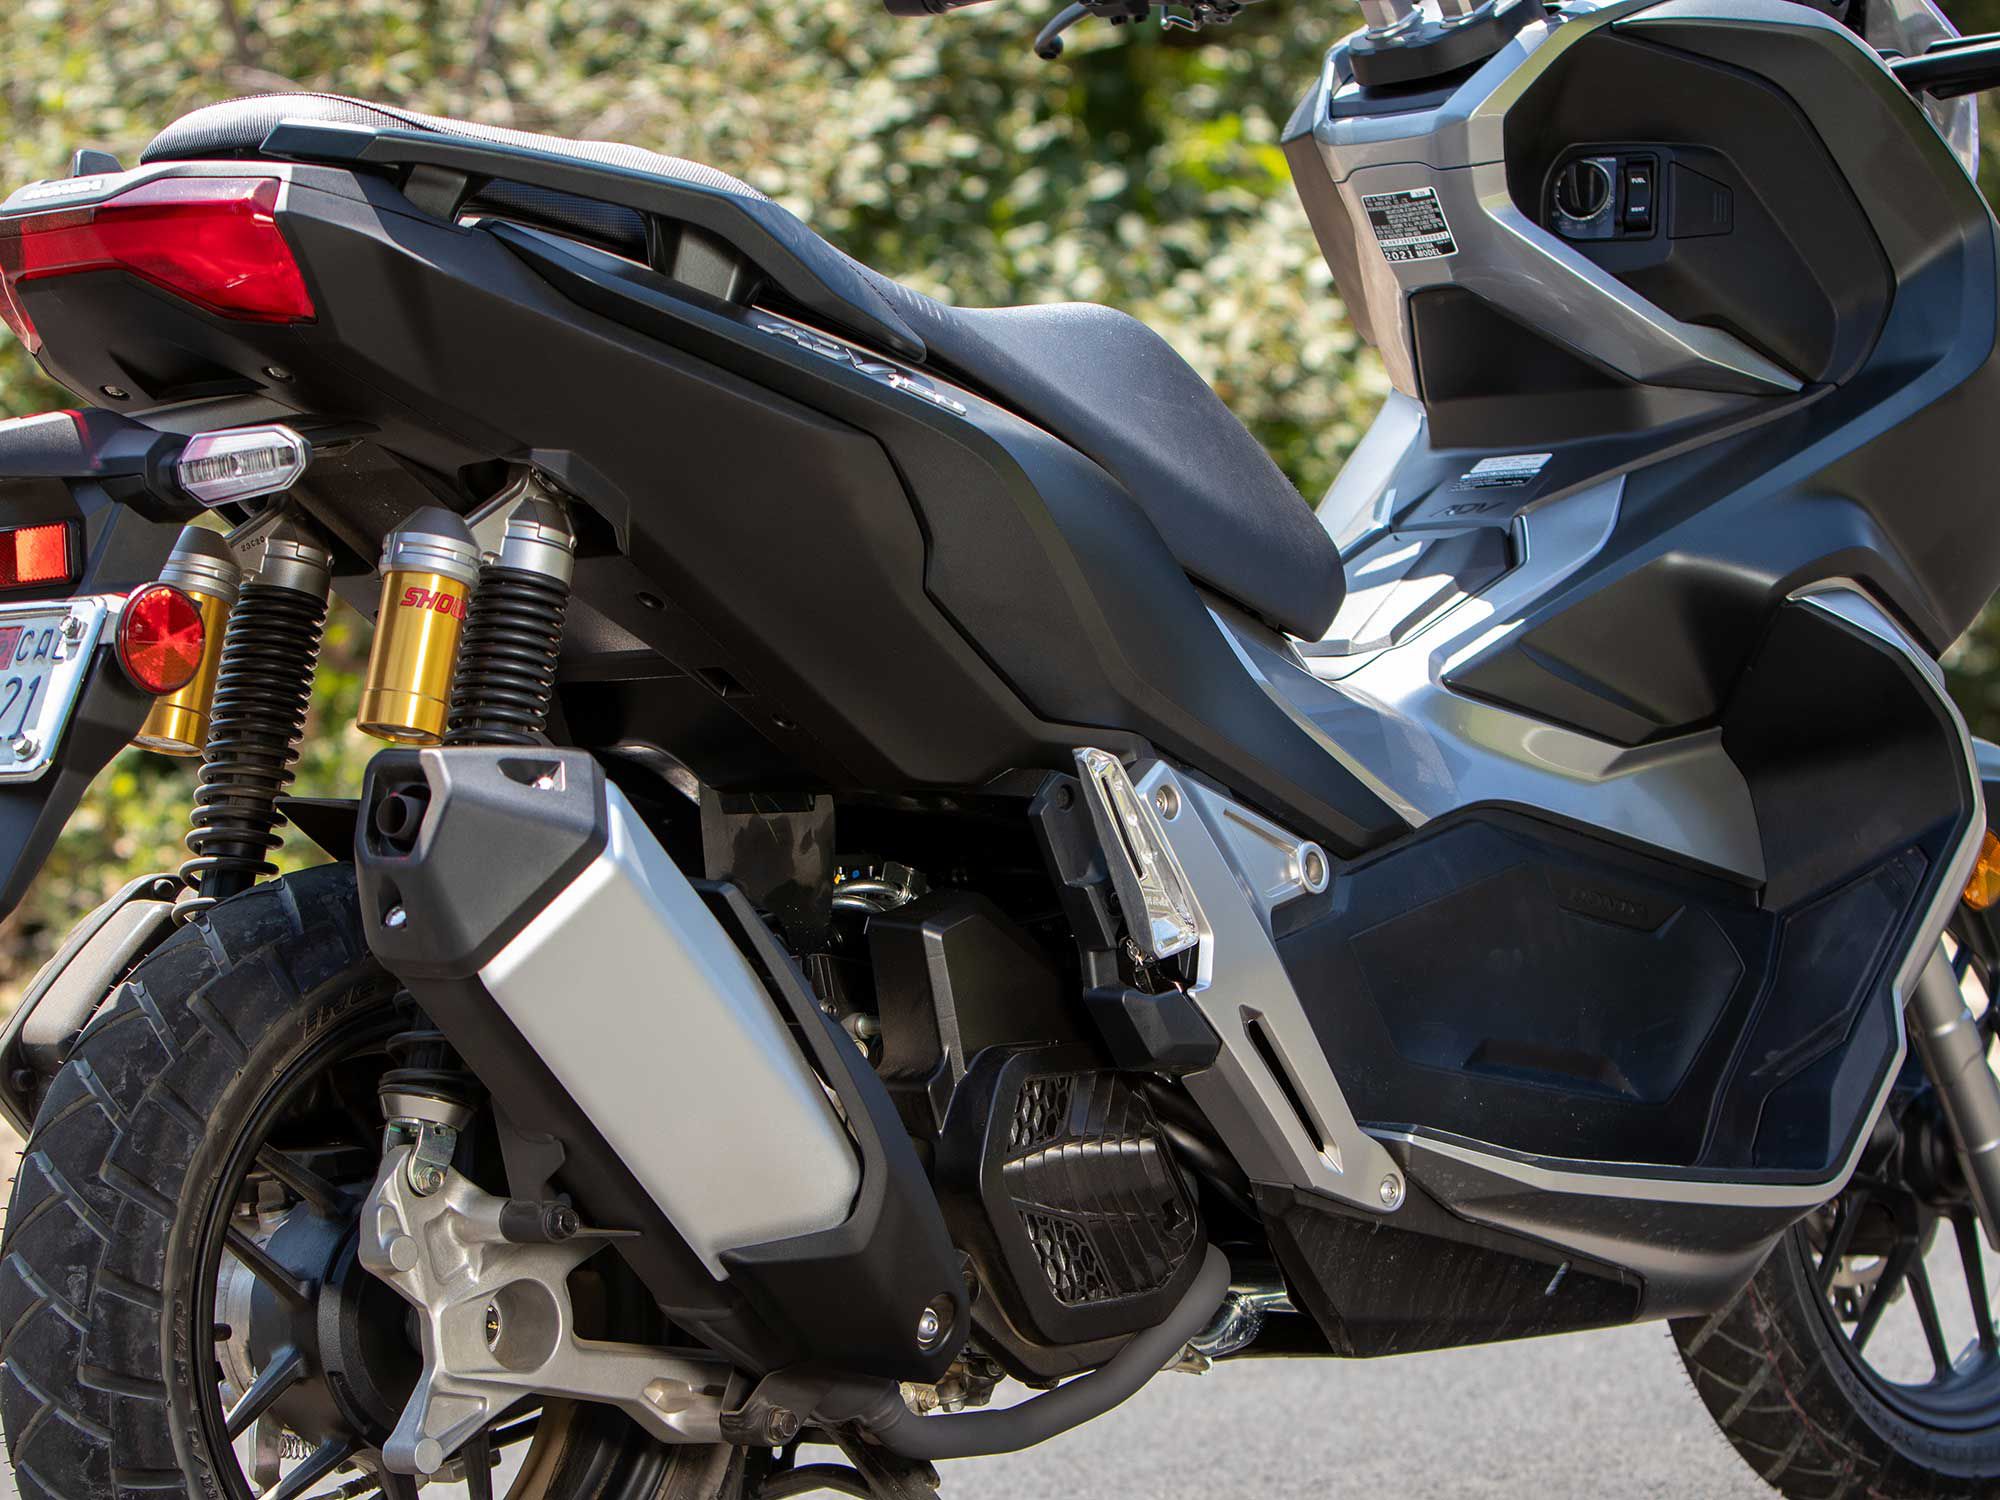 2021 Honda Adv150 First Ride Review Cycle World